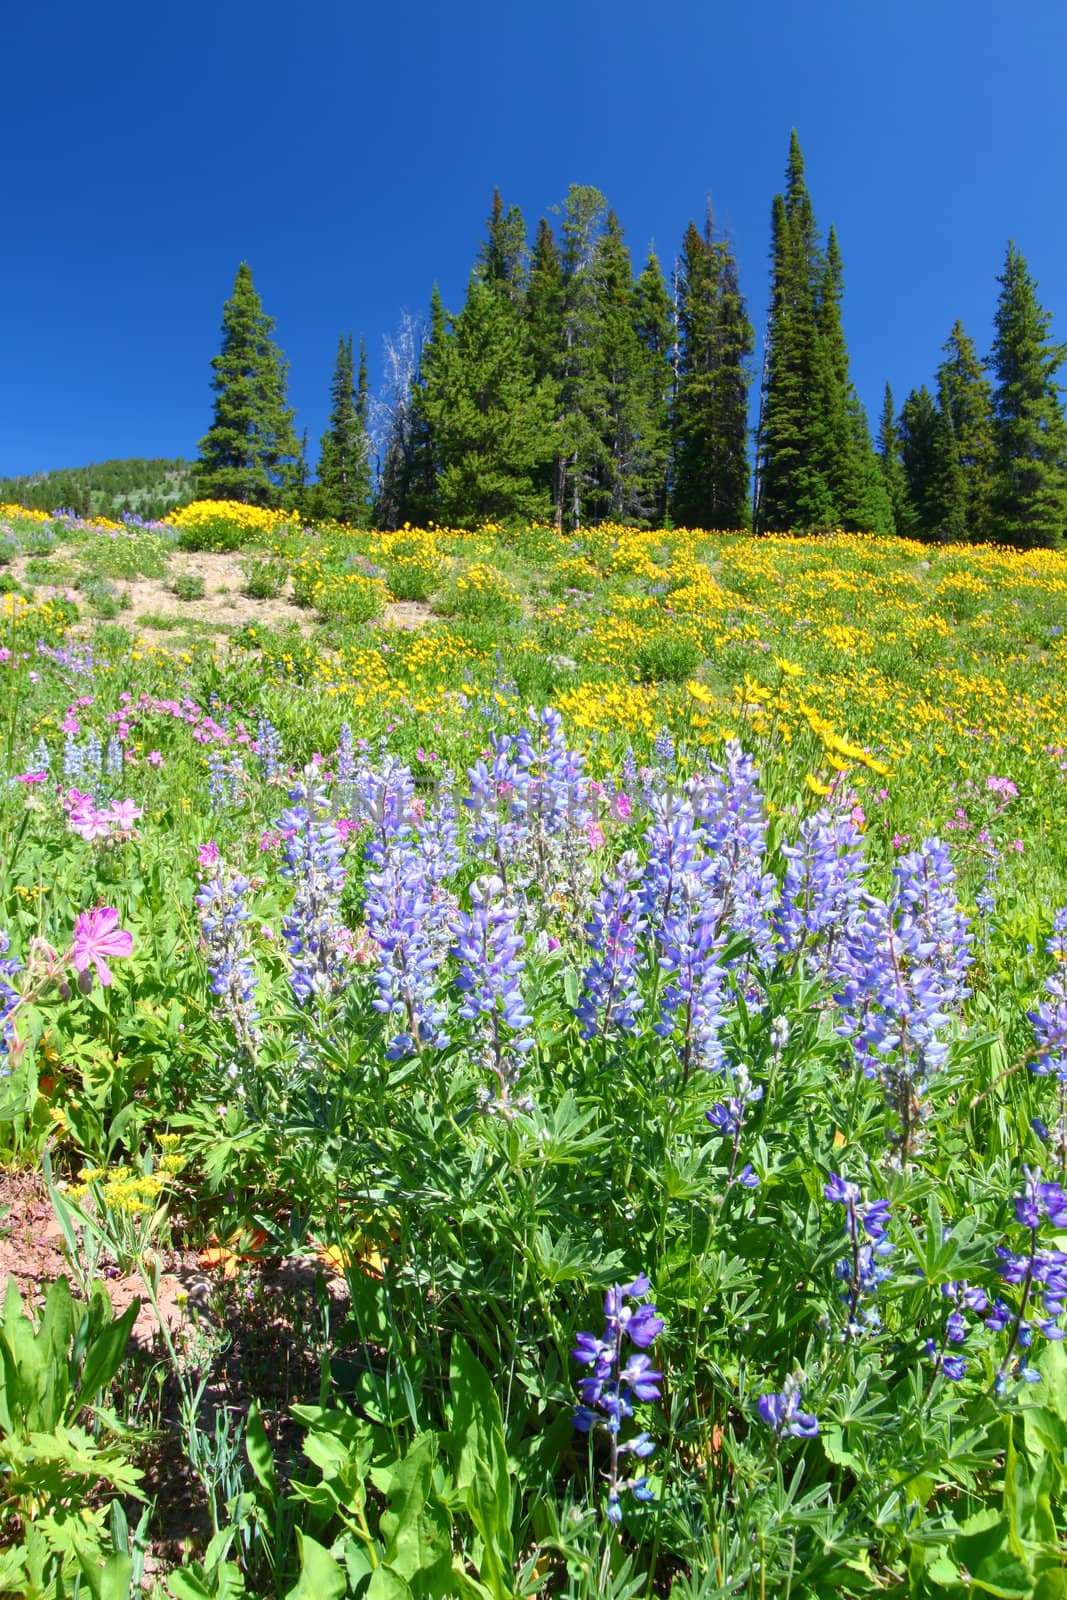 Wildflowers bloom under a gorgeous blue summer sky in Yellowstone National Park in Wyoming.